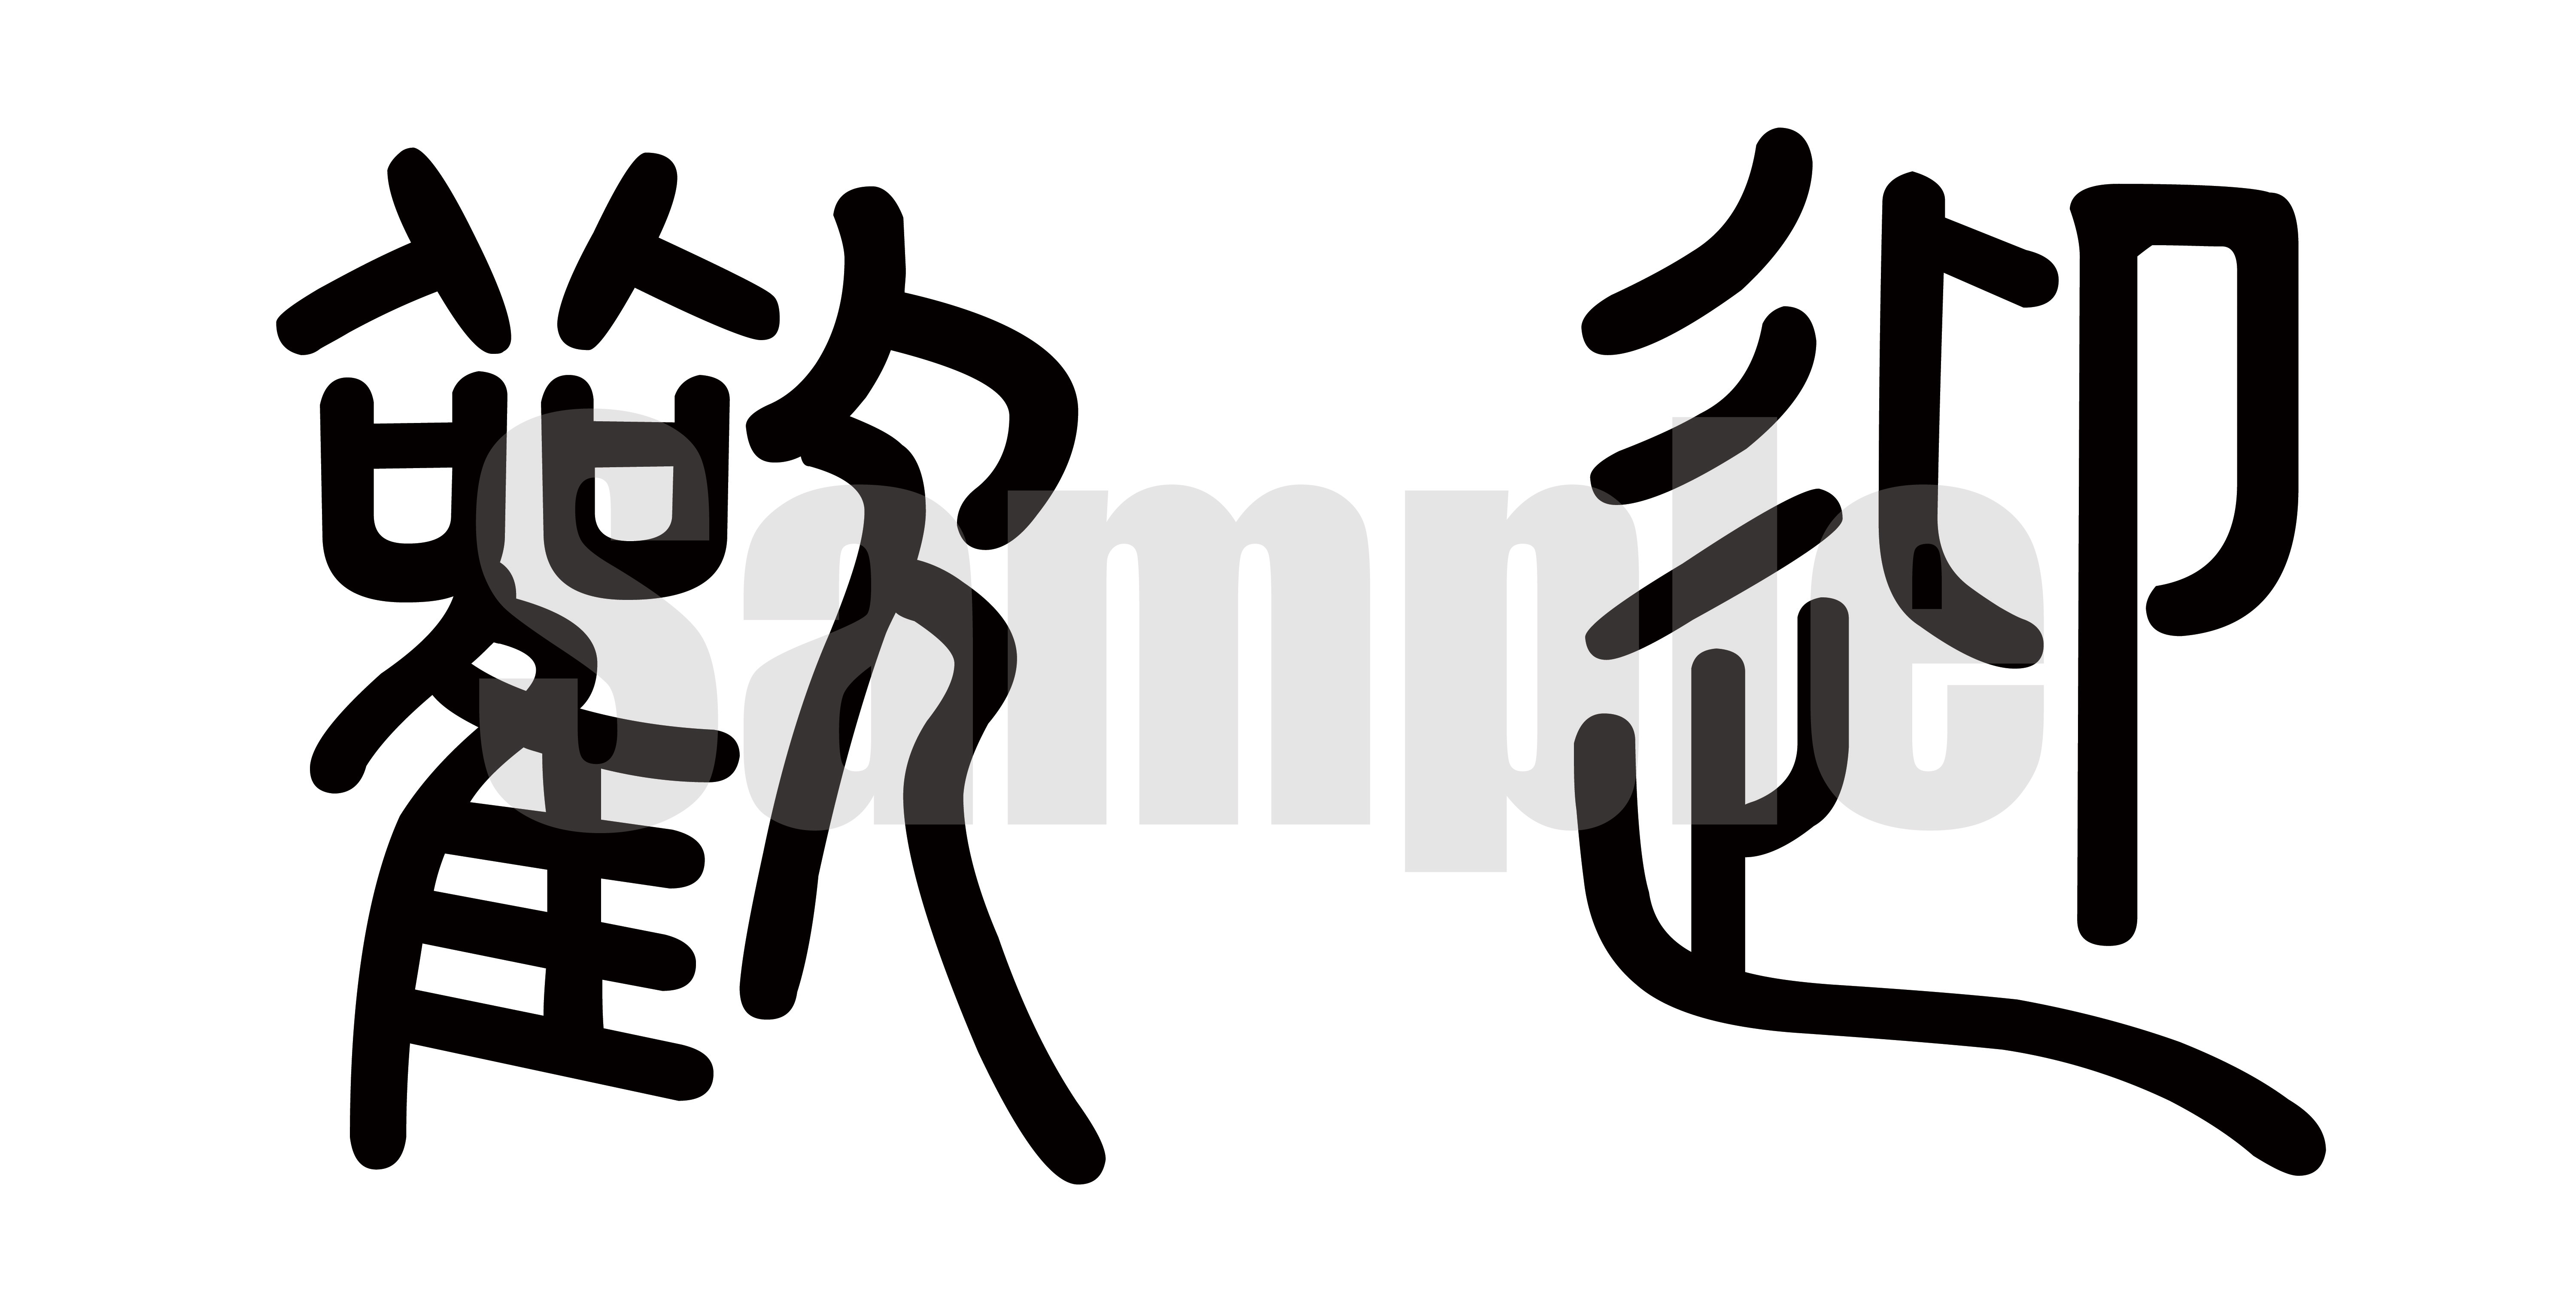 Sample of Chinese Calligraphic Styles